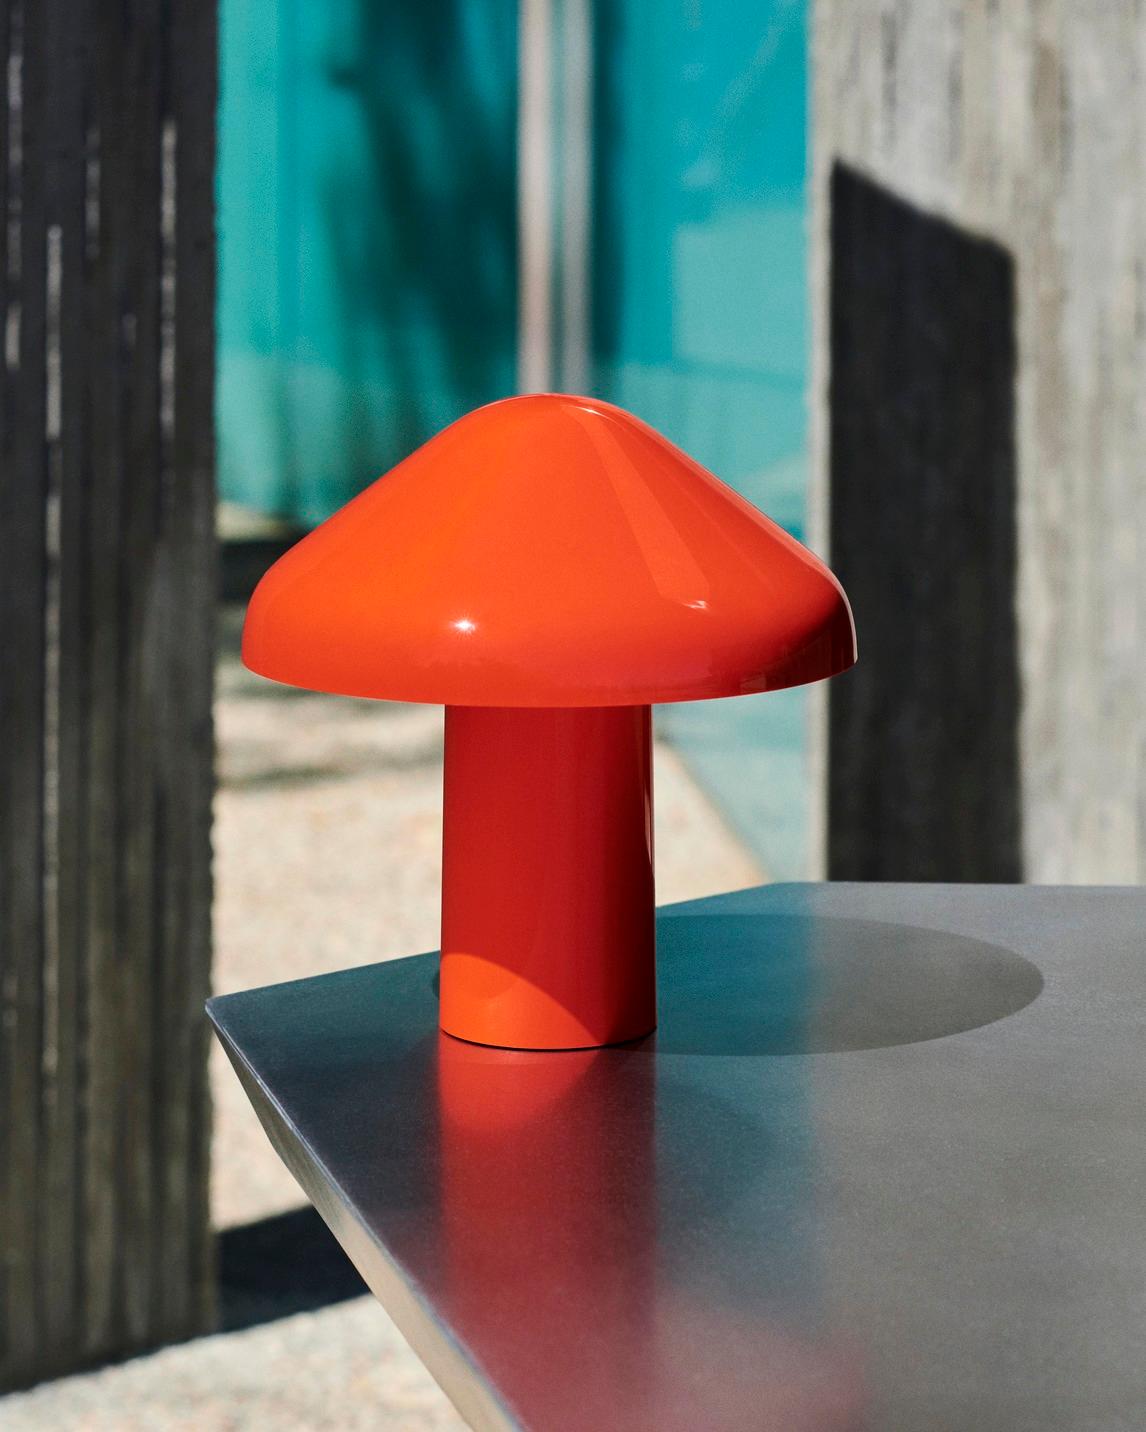 The Pao portable lamp is an exciting collaboration with Japanese designer Naoto Fukasawa. 
Named after the soft, glowing shape of traditional Mongolian Pao tents, Pao draws on Fukasawa’s aesthetic of beautiful simplicity; creating an everyday object